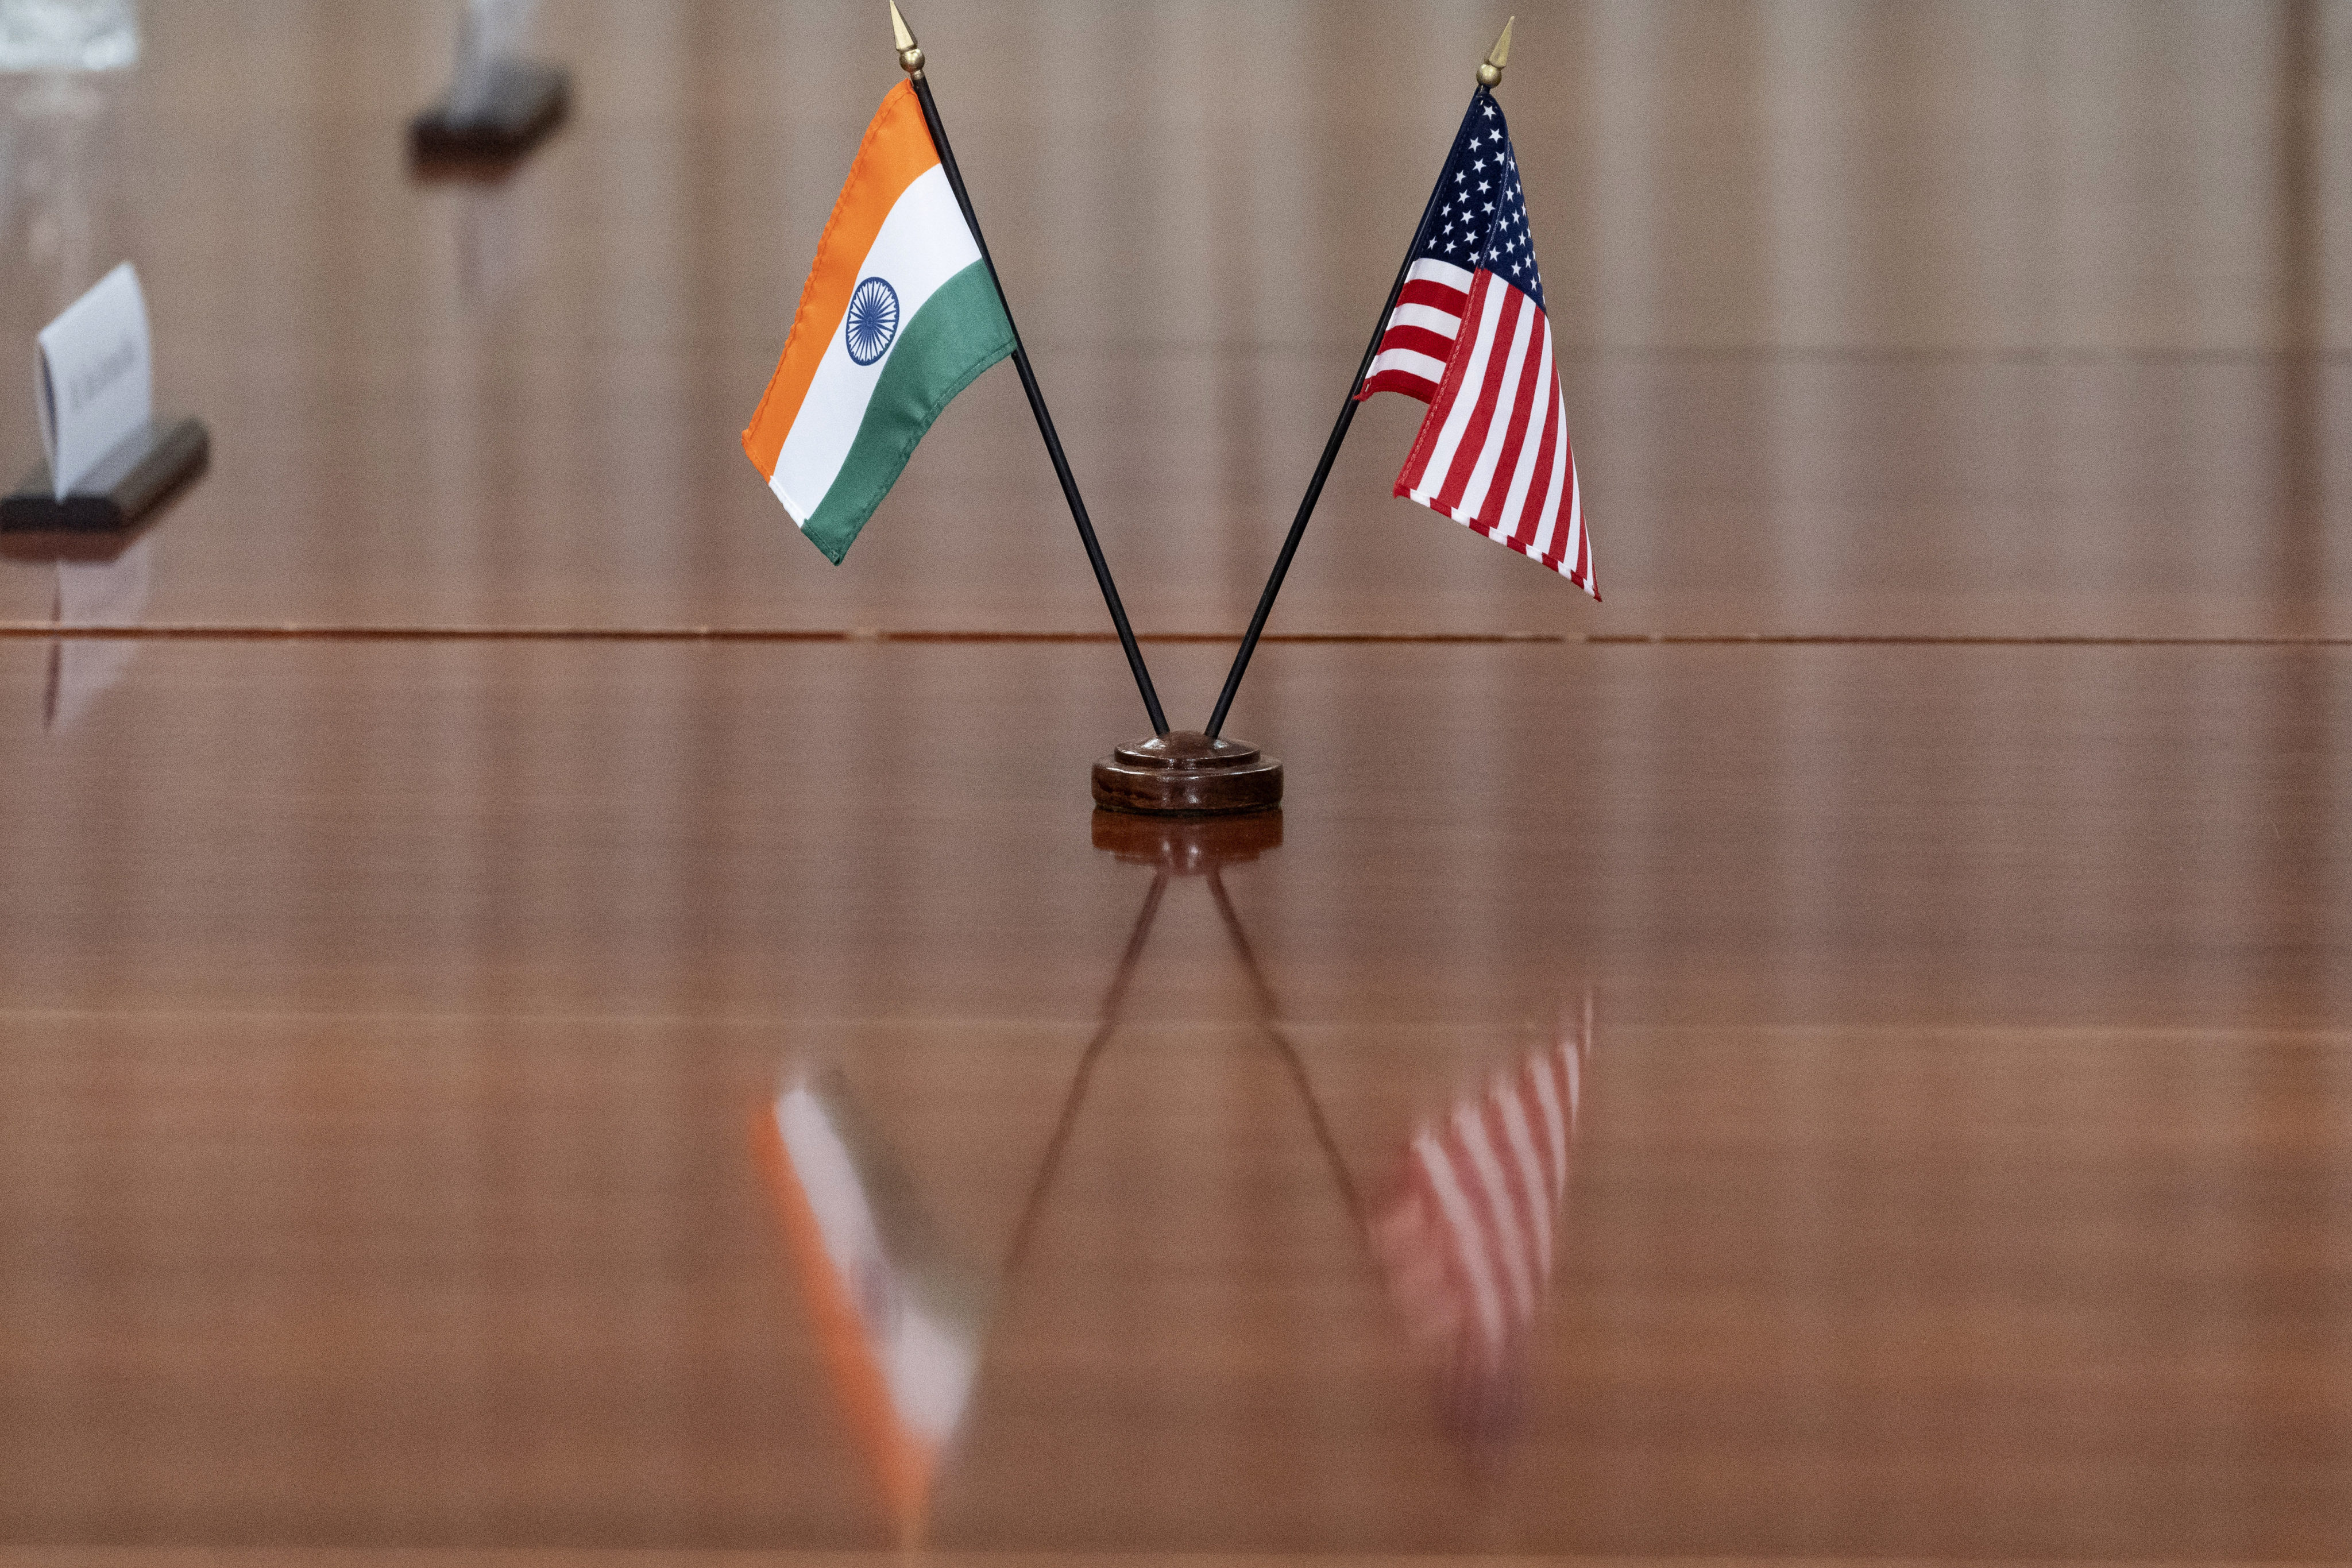 Indian and US flags are seen on the table during a meeting in Washington in September 2022. Photo: AP